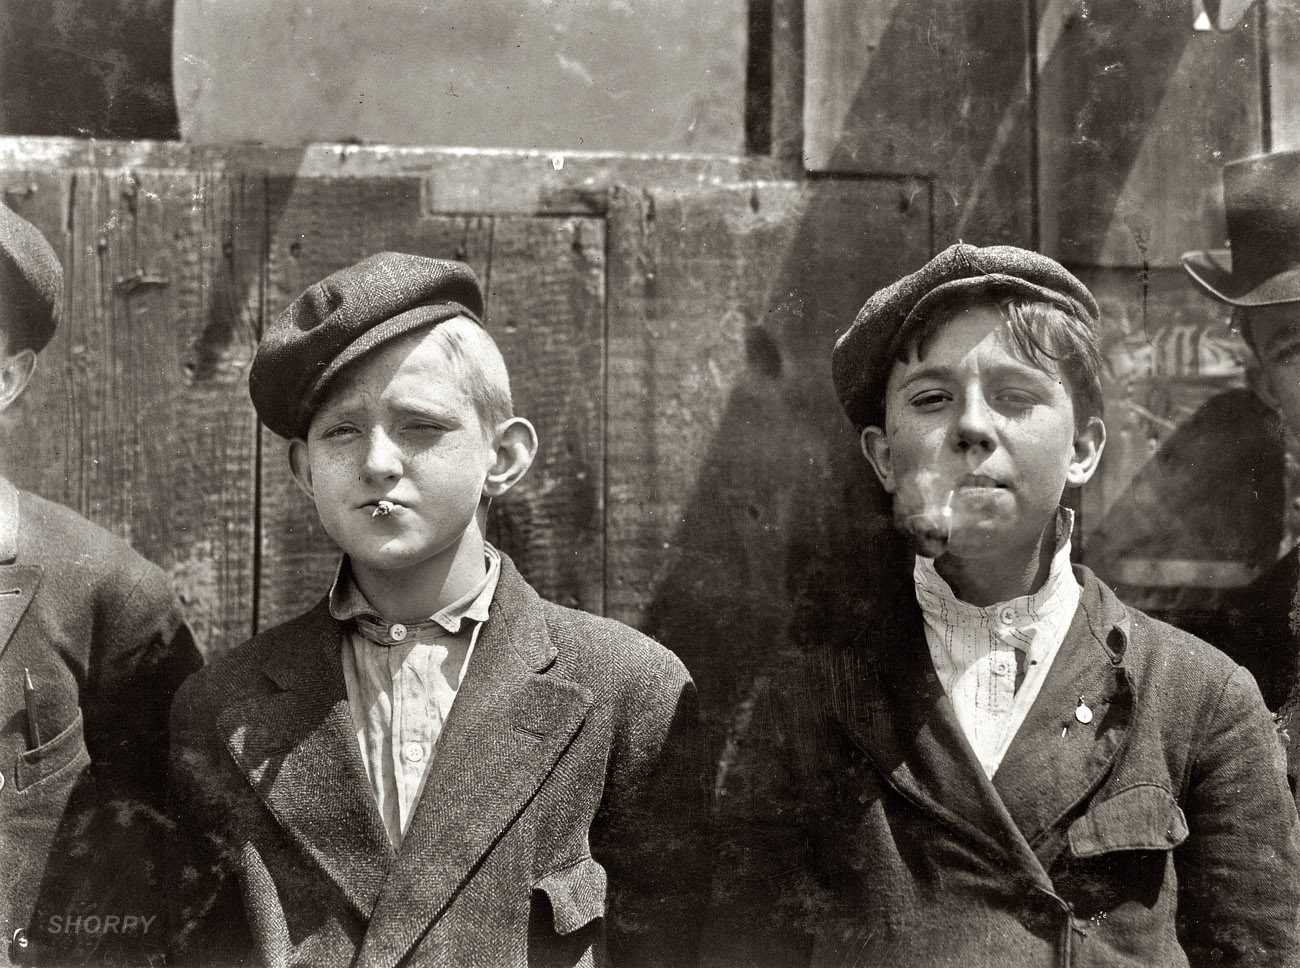 11 a.m. May 9, 1910. St. Louis, Missouri. "Newsies at Skeeter's branch. They were all smoking." Photograph and caption by Lewis Wickes Hine. View full size.